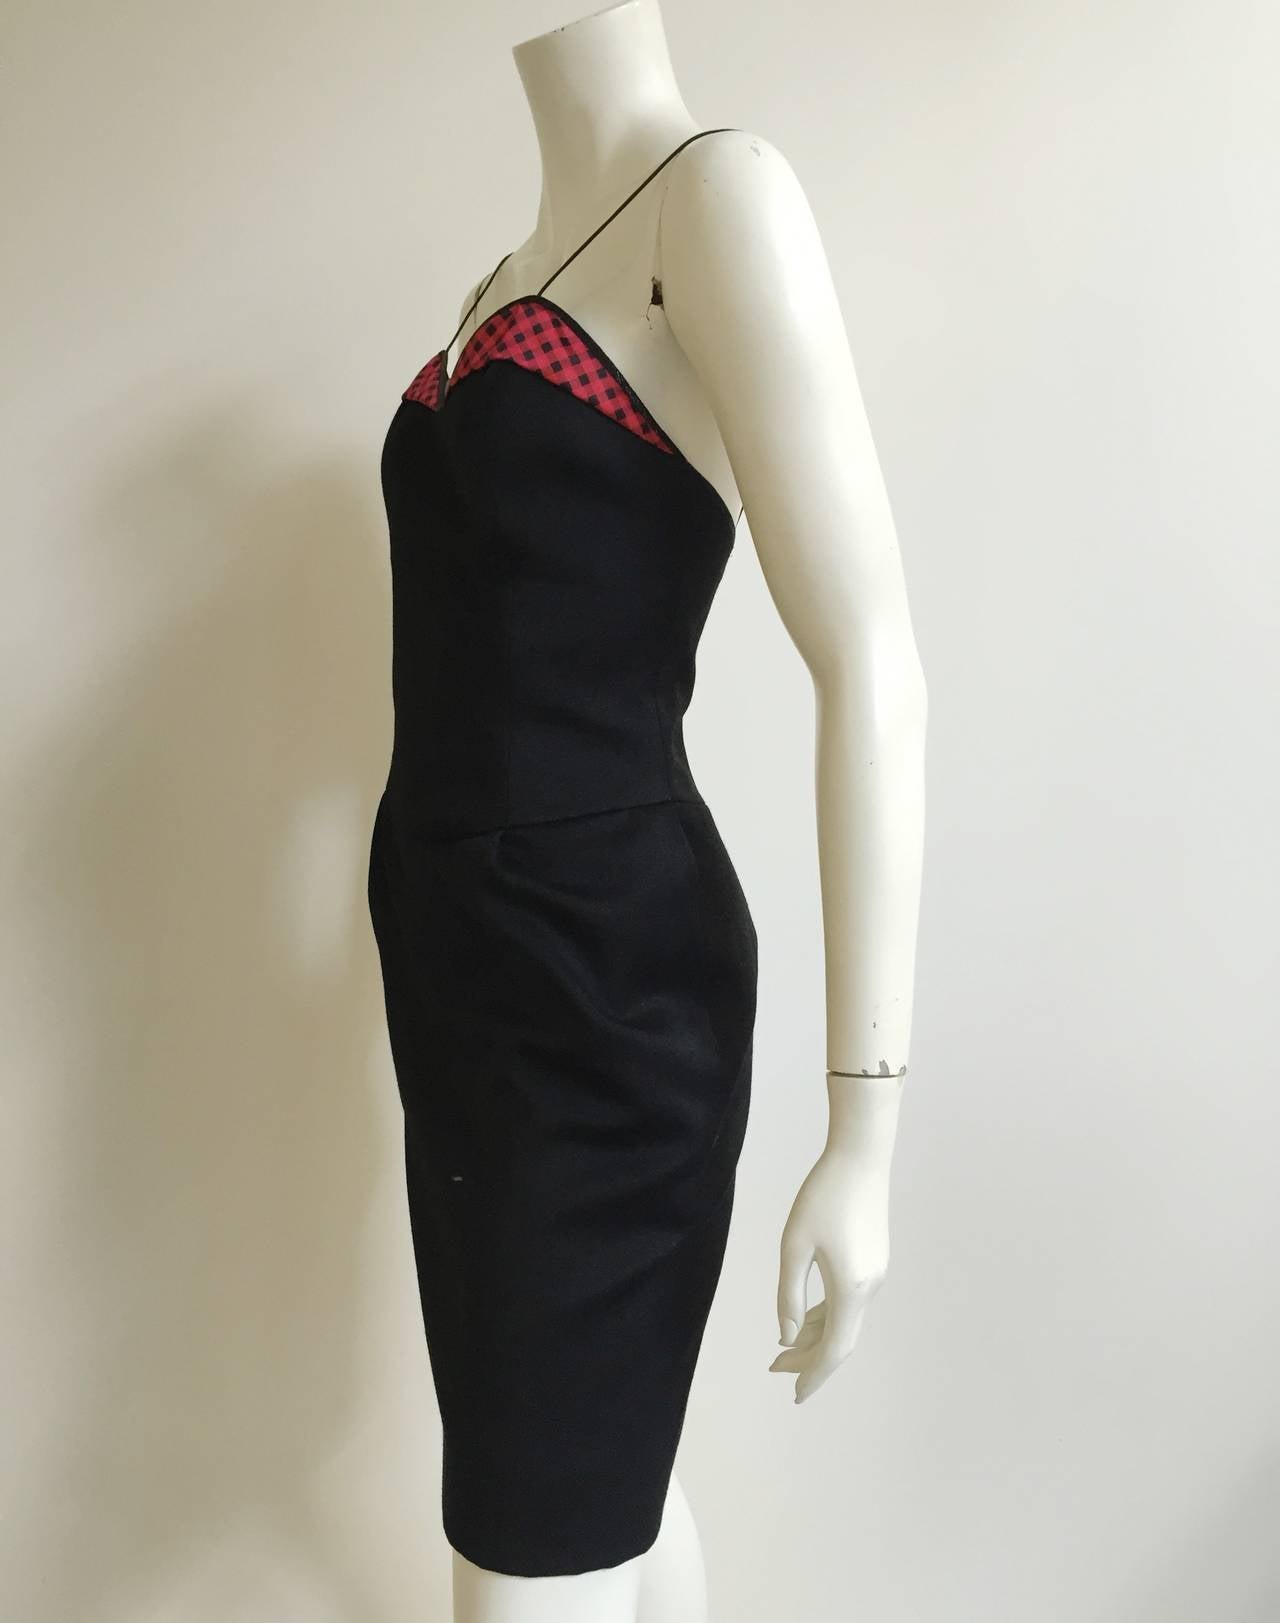 Geoffrey Beene Mr. Beene 90s cocktail dress with pockets size 4. 3